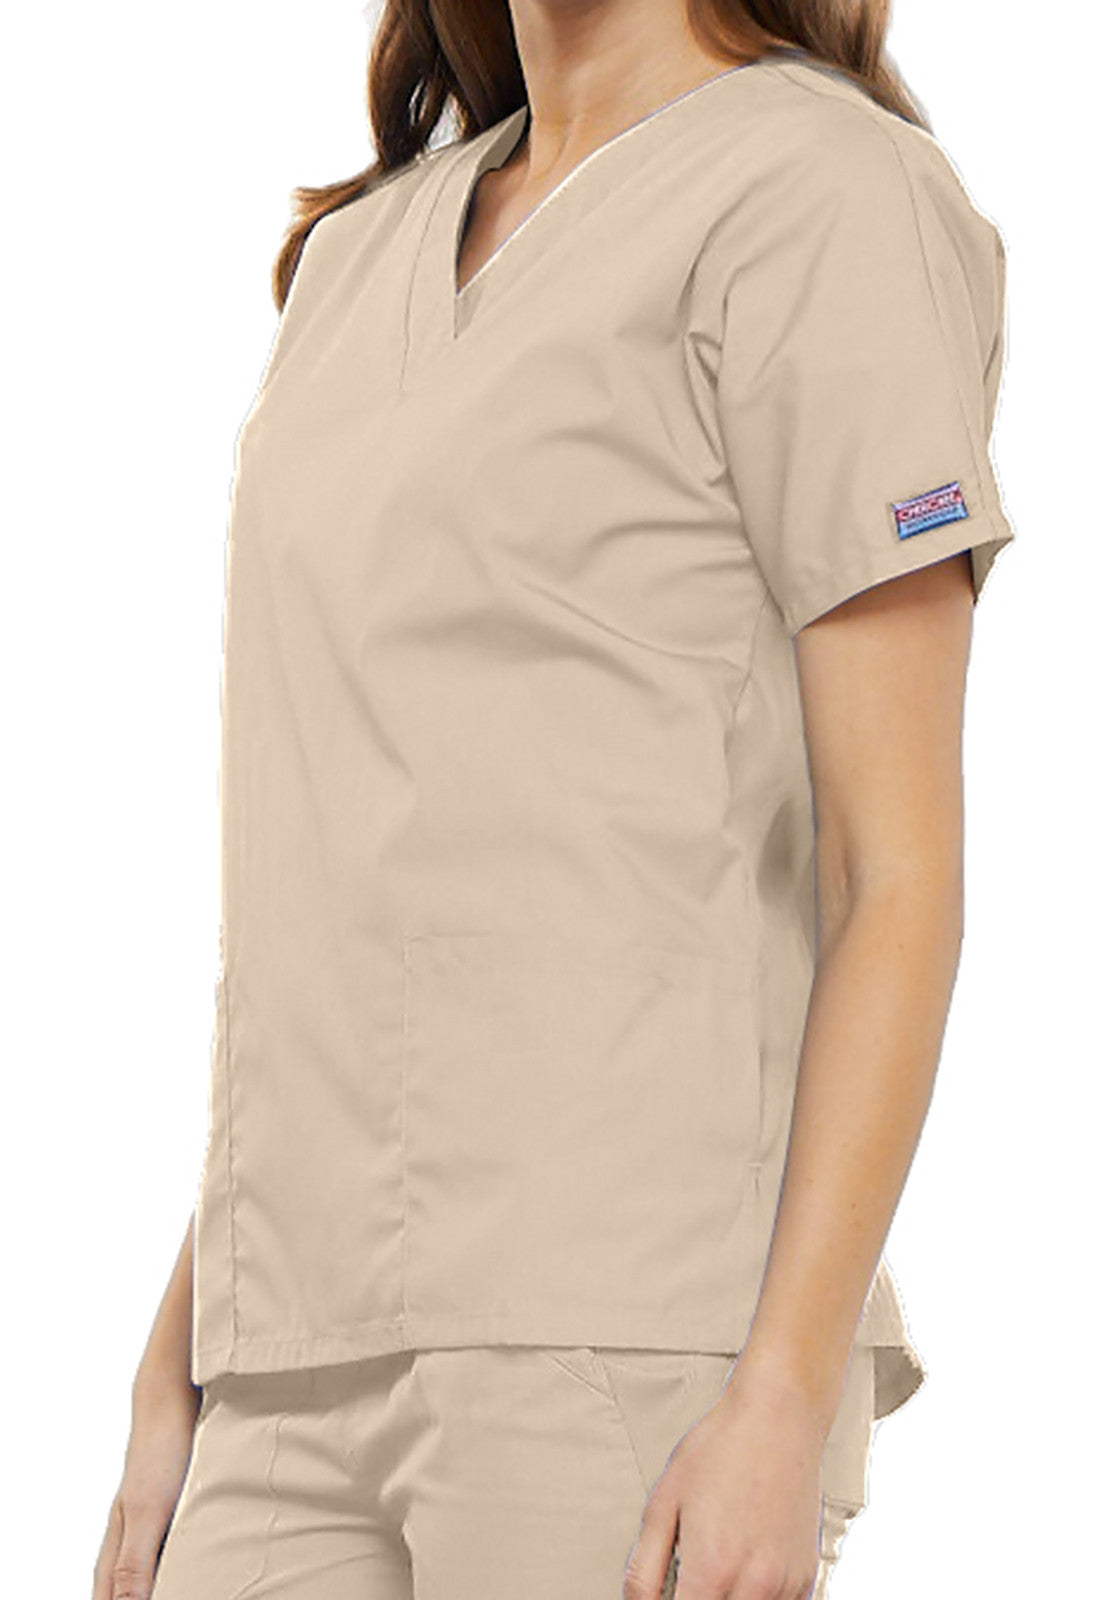 Guéthary - Tunique médicale - Col V - Manches courtes - Femme - Cherokee - Couleur 2 Cherokee Authentic Workwear